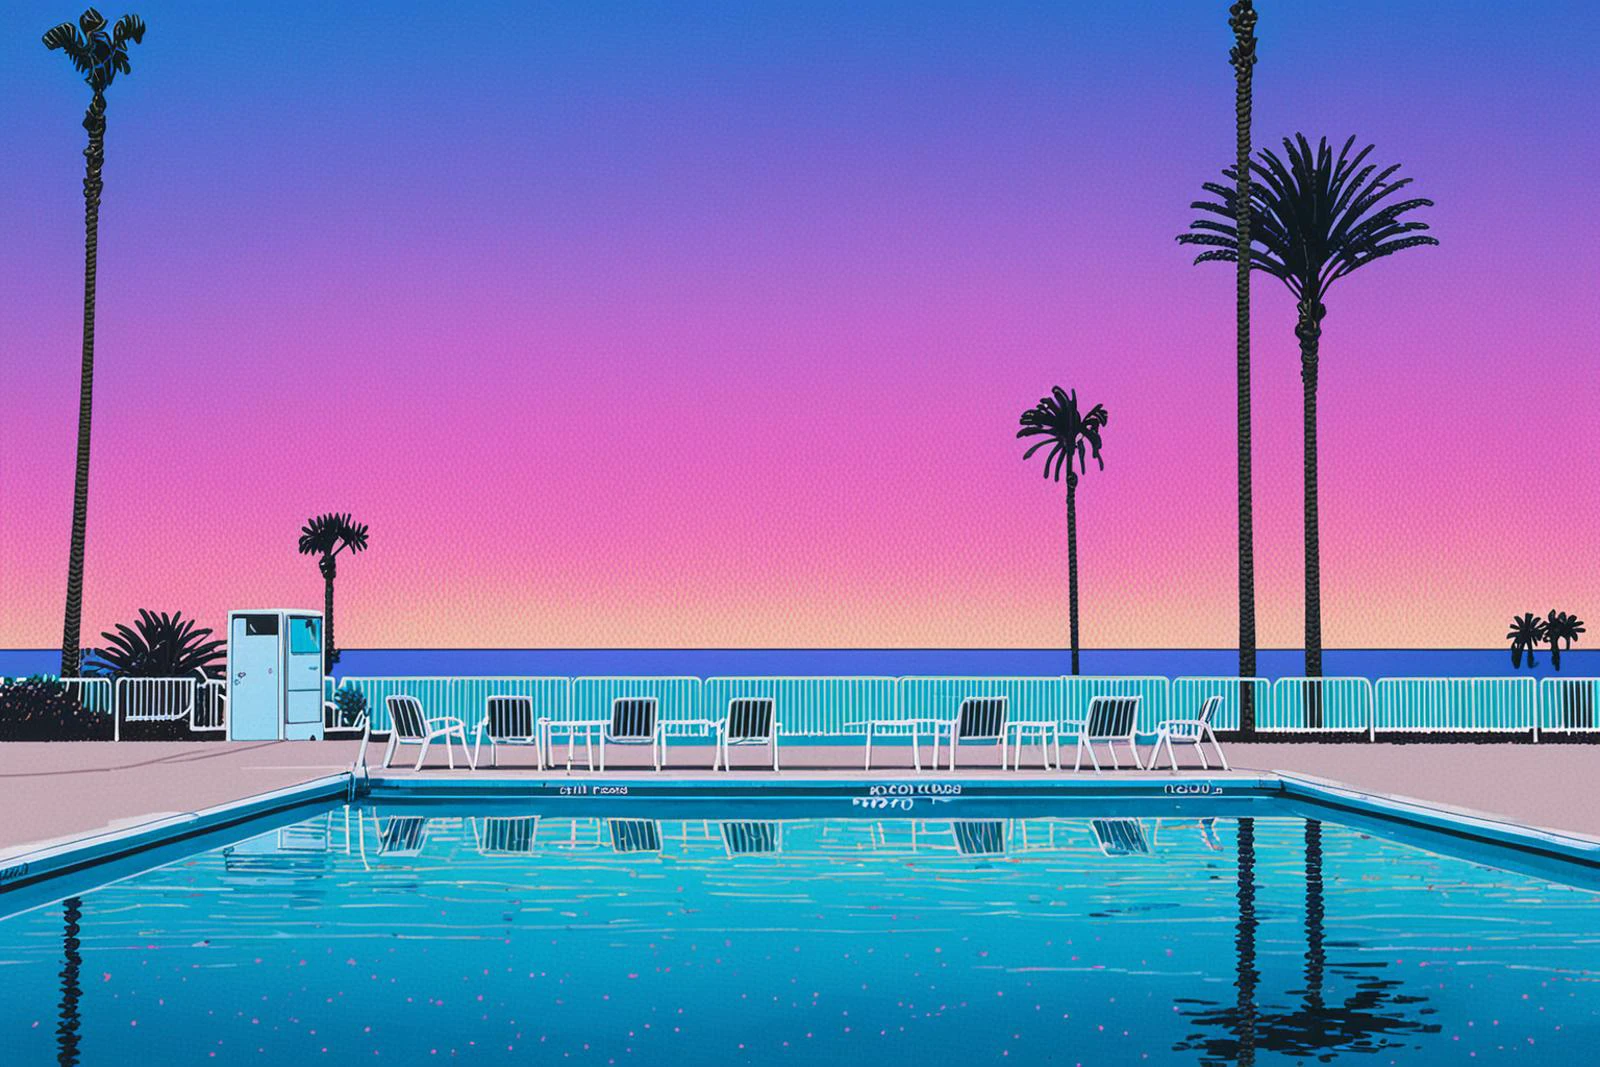 Lifted view of A 80's pool surrounded by beach and Palm Trees at sunset, gradient sky, water reflection, road, chairs, building, 